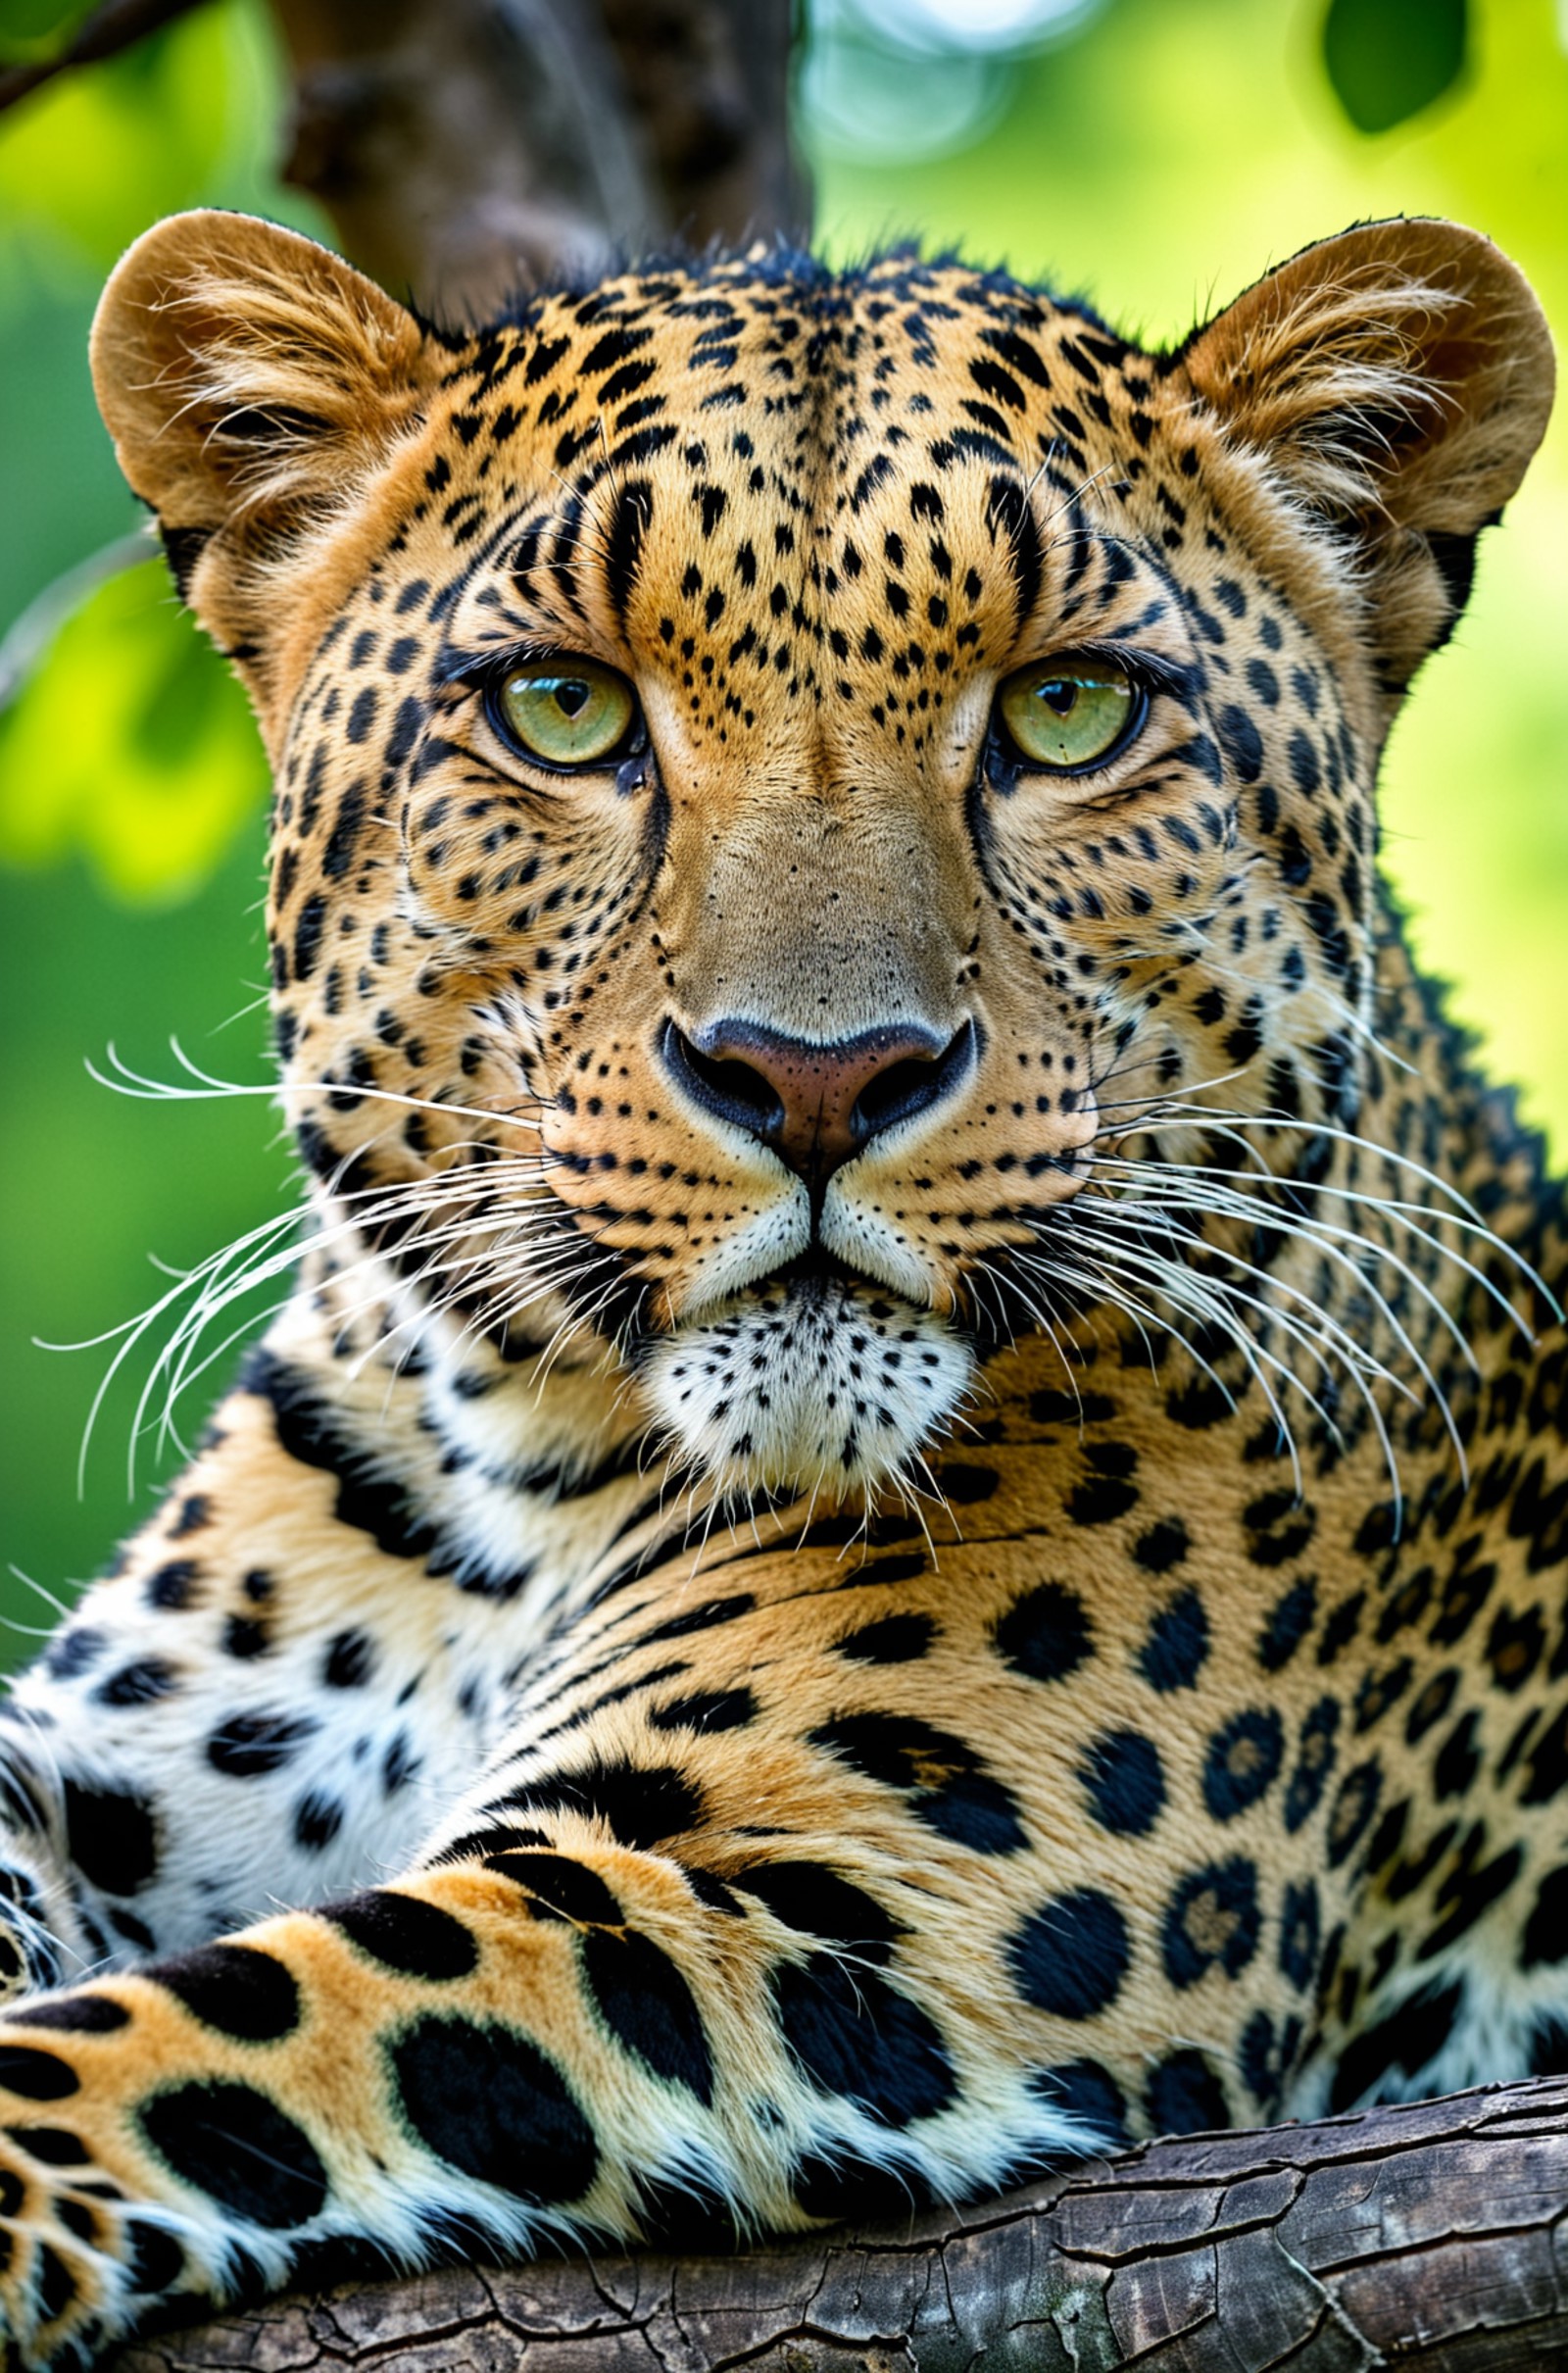 close-up portrait of a leopard resting on a tree branch, its intense gaze captured in stunning detail against a blurred gr...